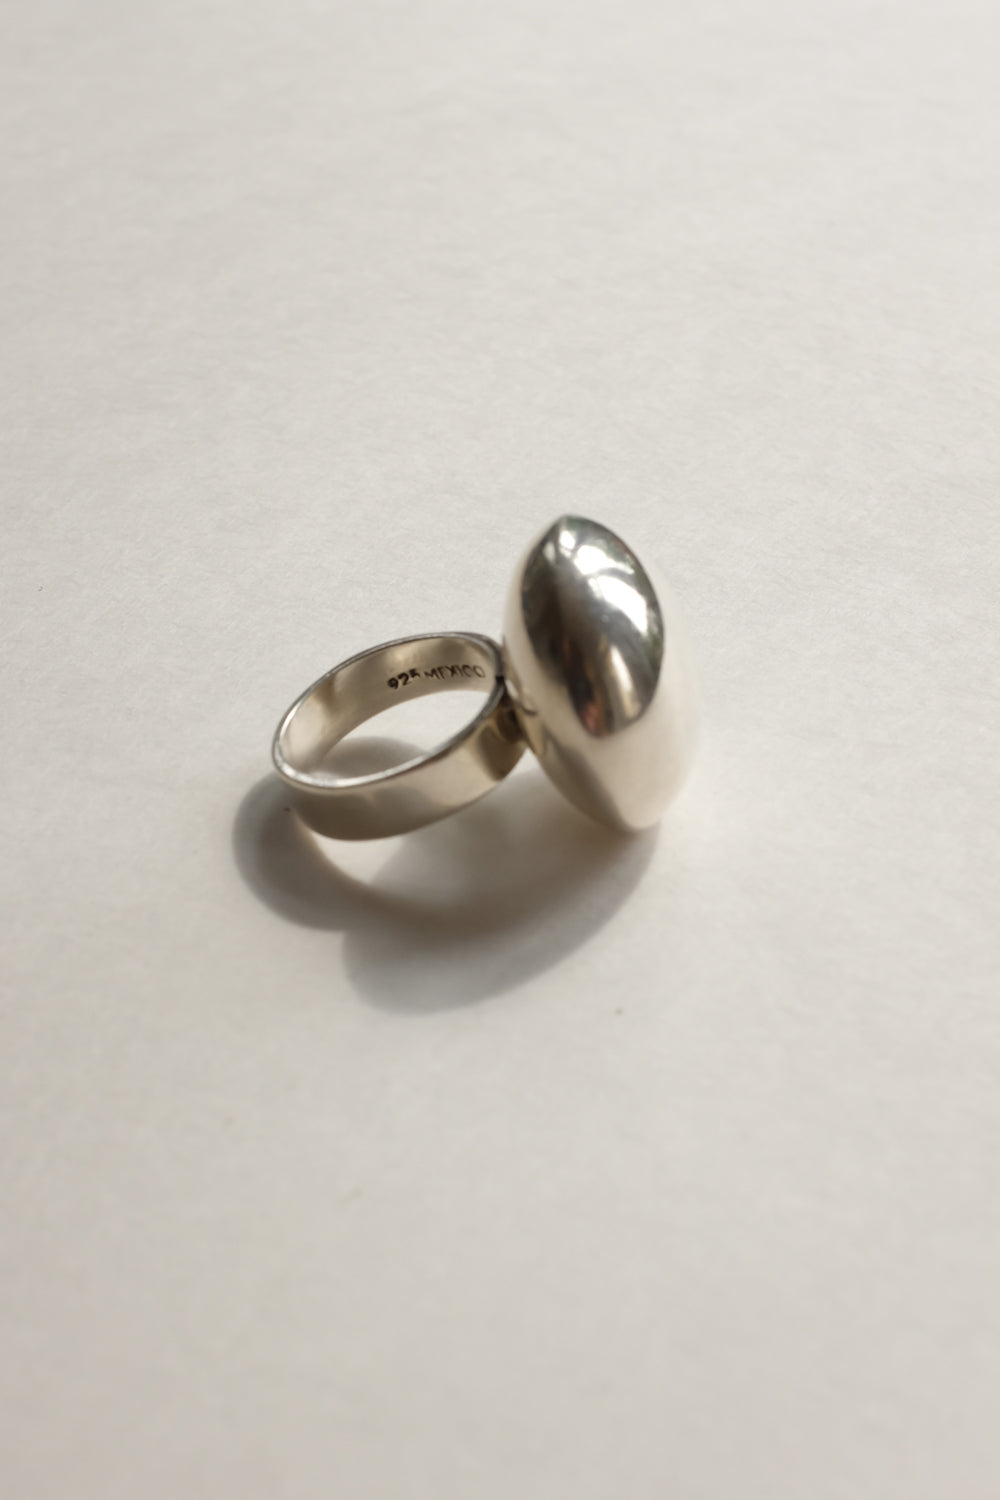 SILVER BALL 925 VINTAGE RING